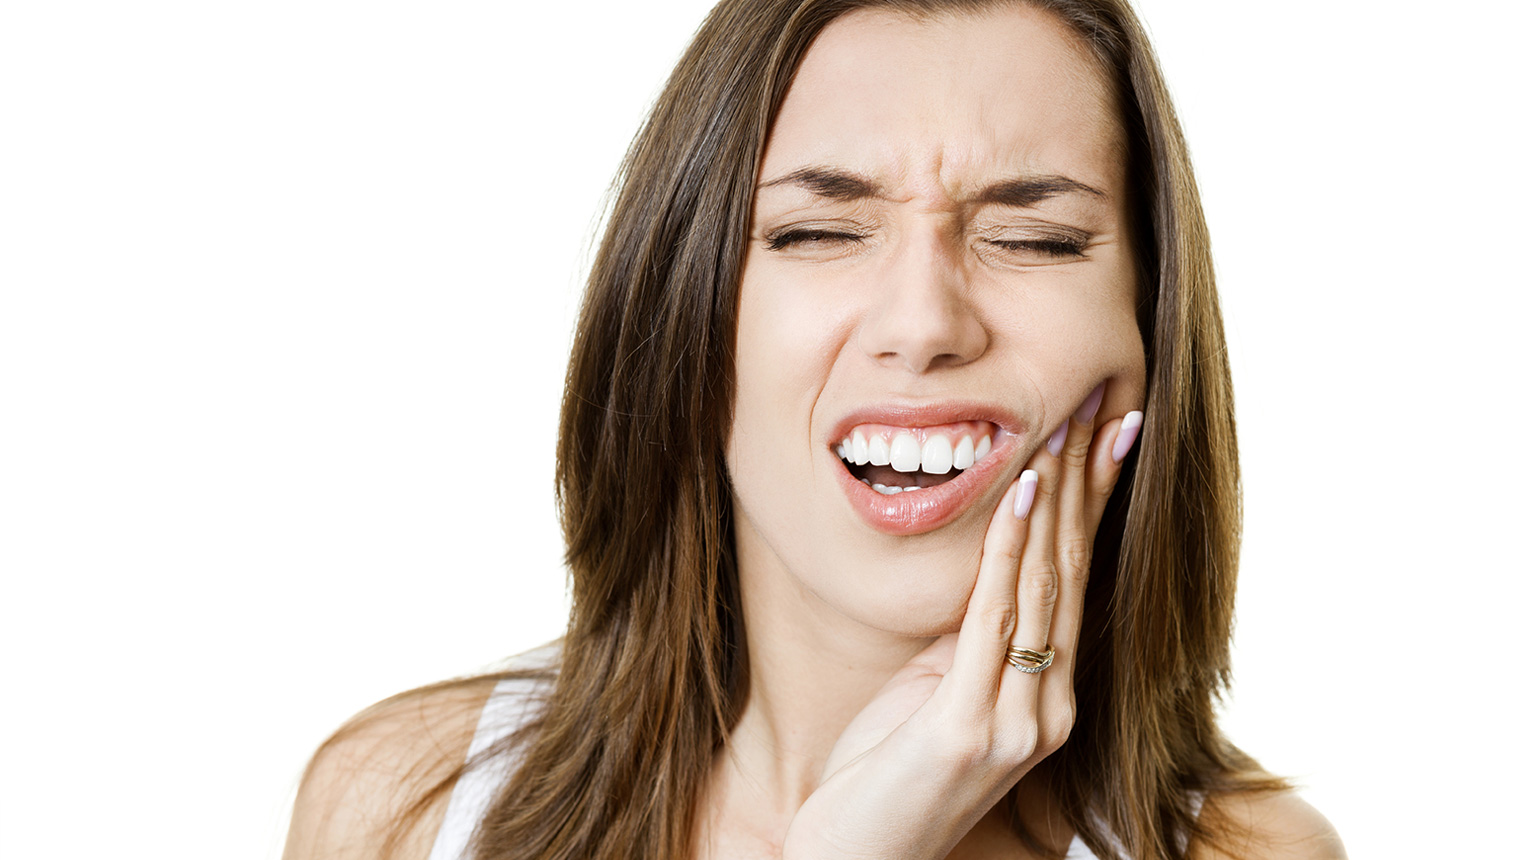 Remedies to Relieve Toothache